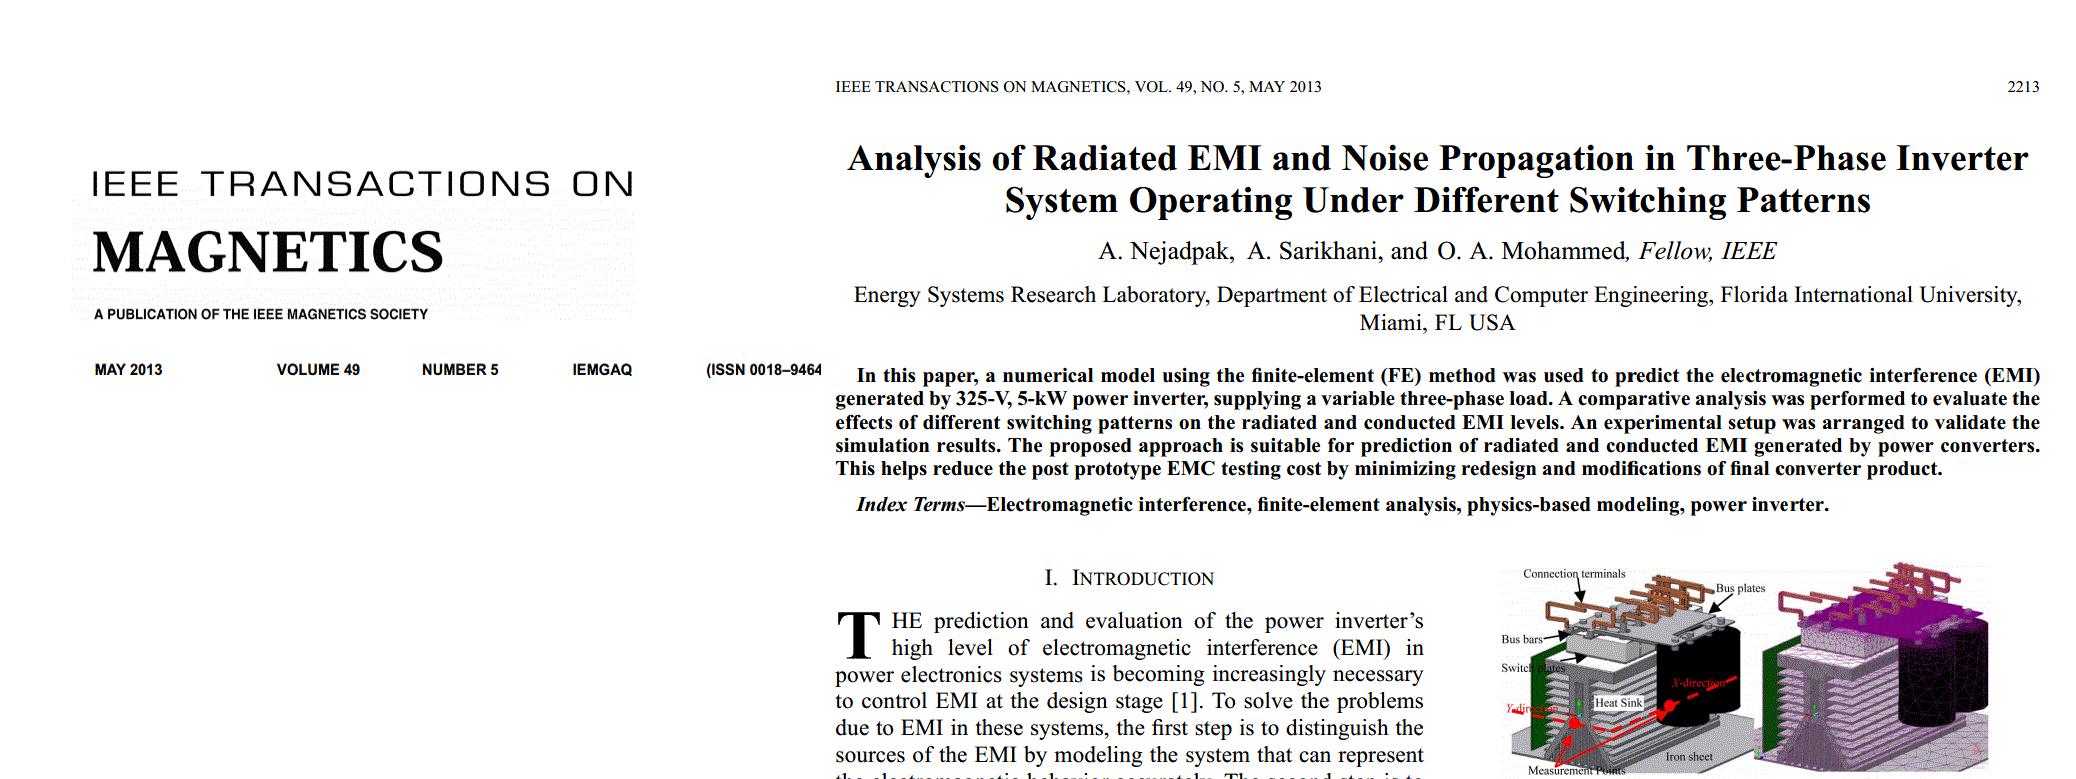 Analysis of Radiated EMI and Noise Propagation in Three-Phase Inverter System Operating Under Different Switching Patterns